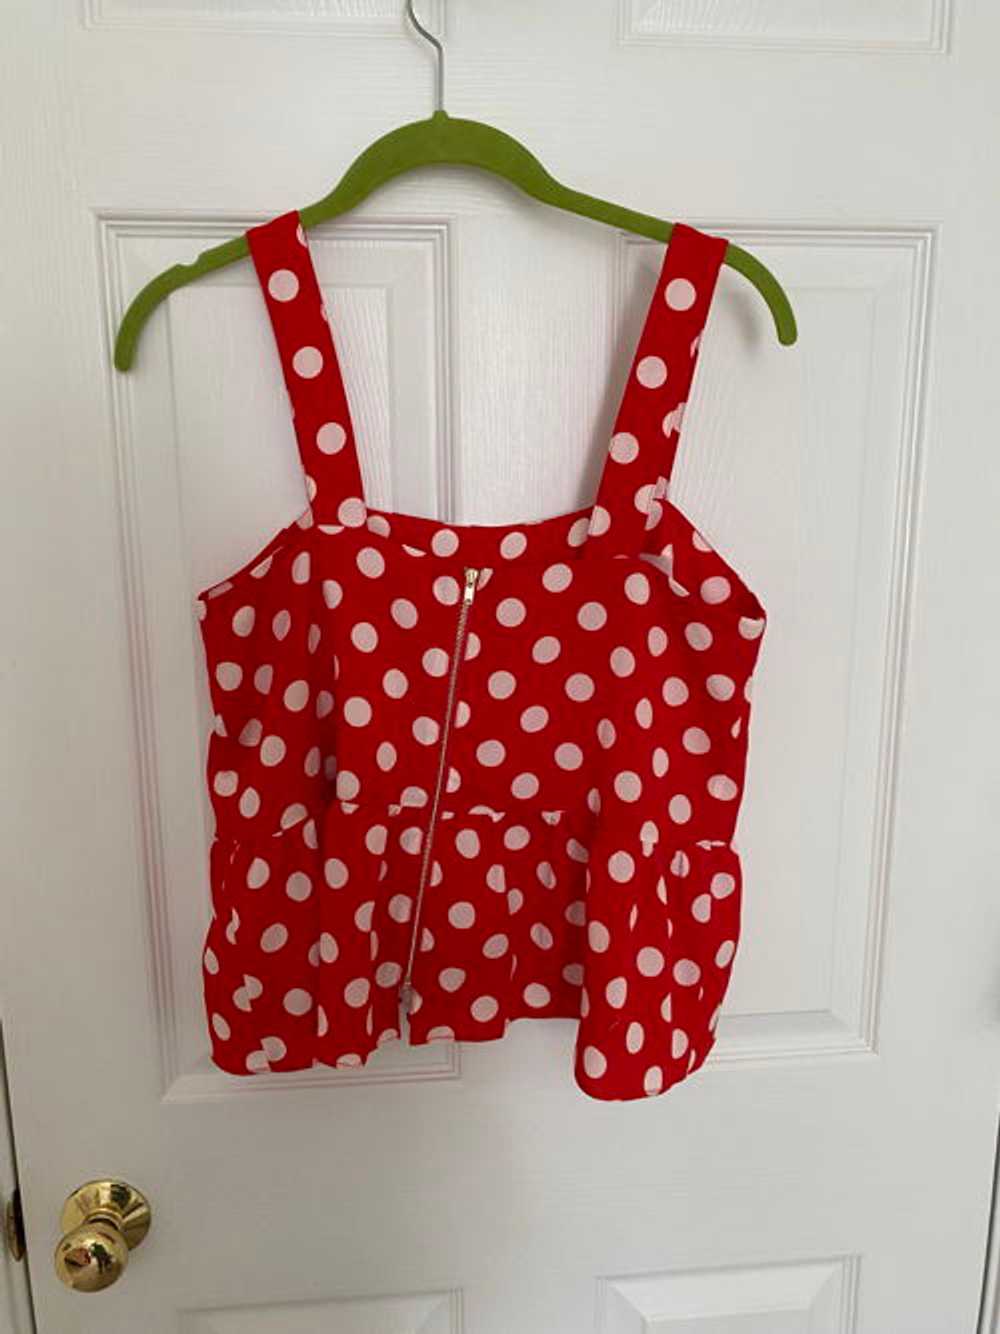 CROSBY by Mollie Burch Kami Tank - Red Dot - image 2